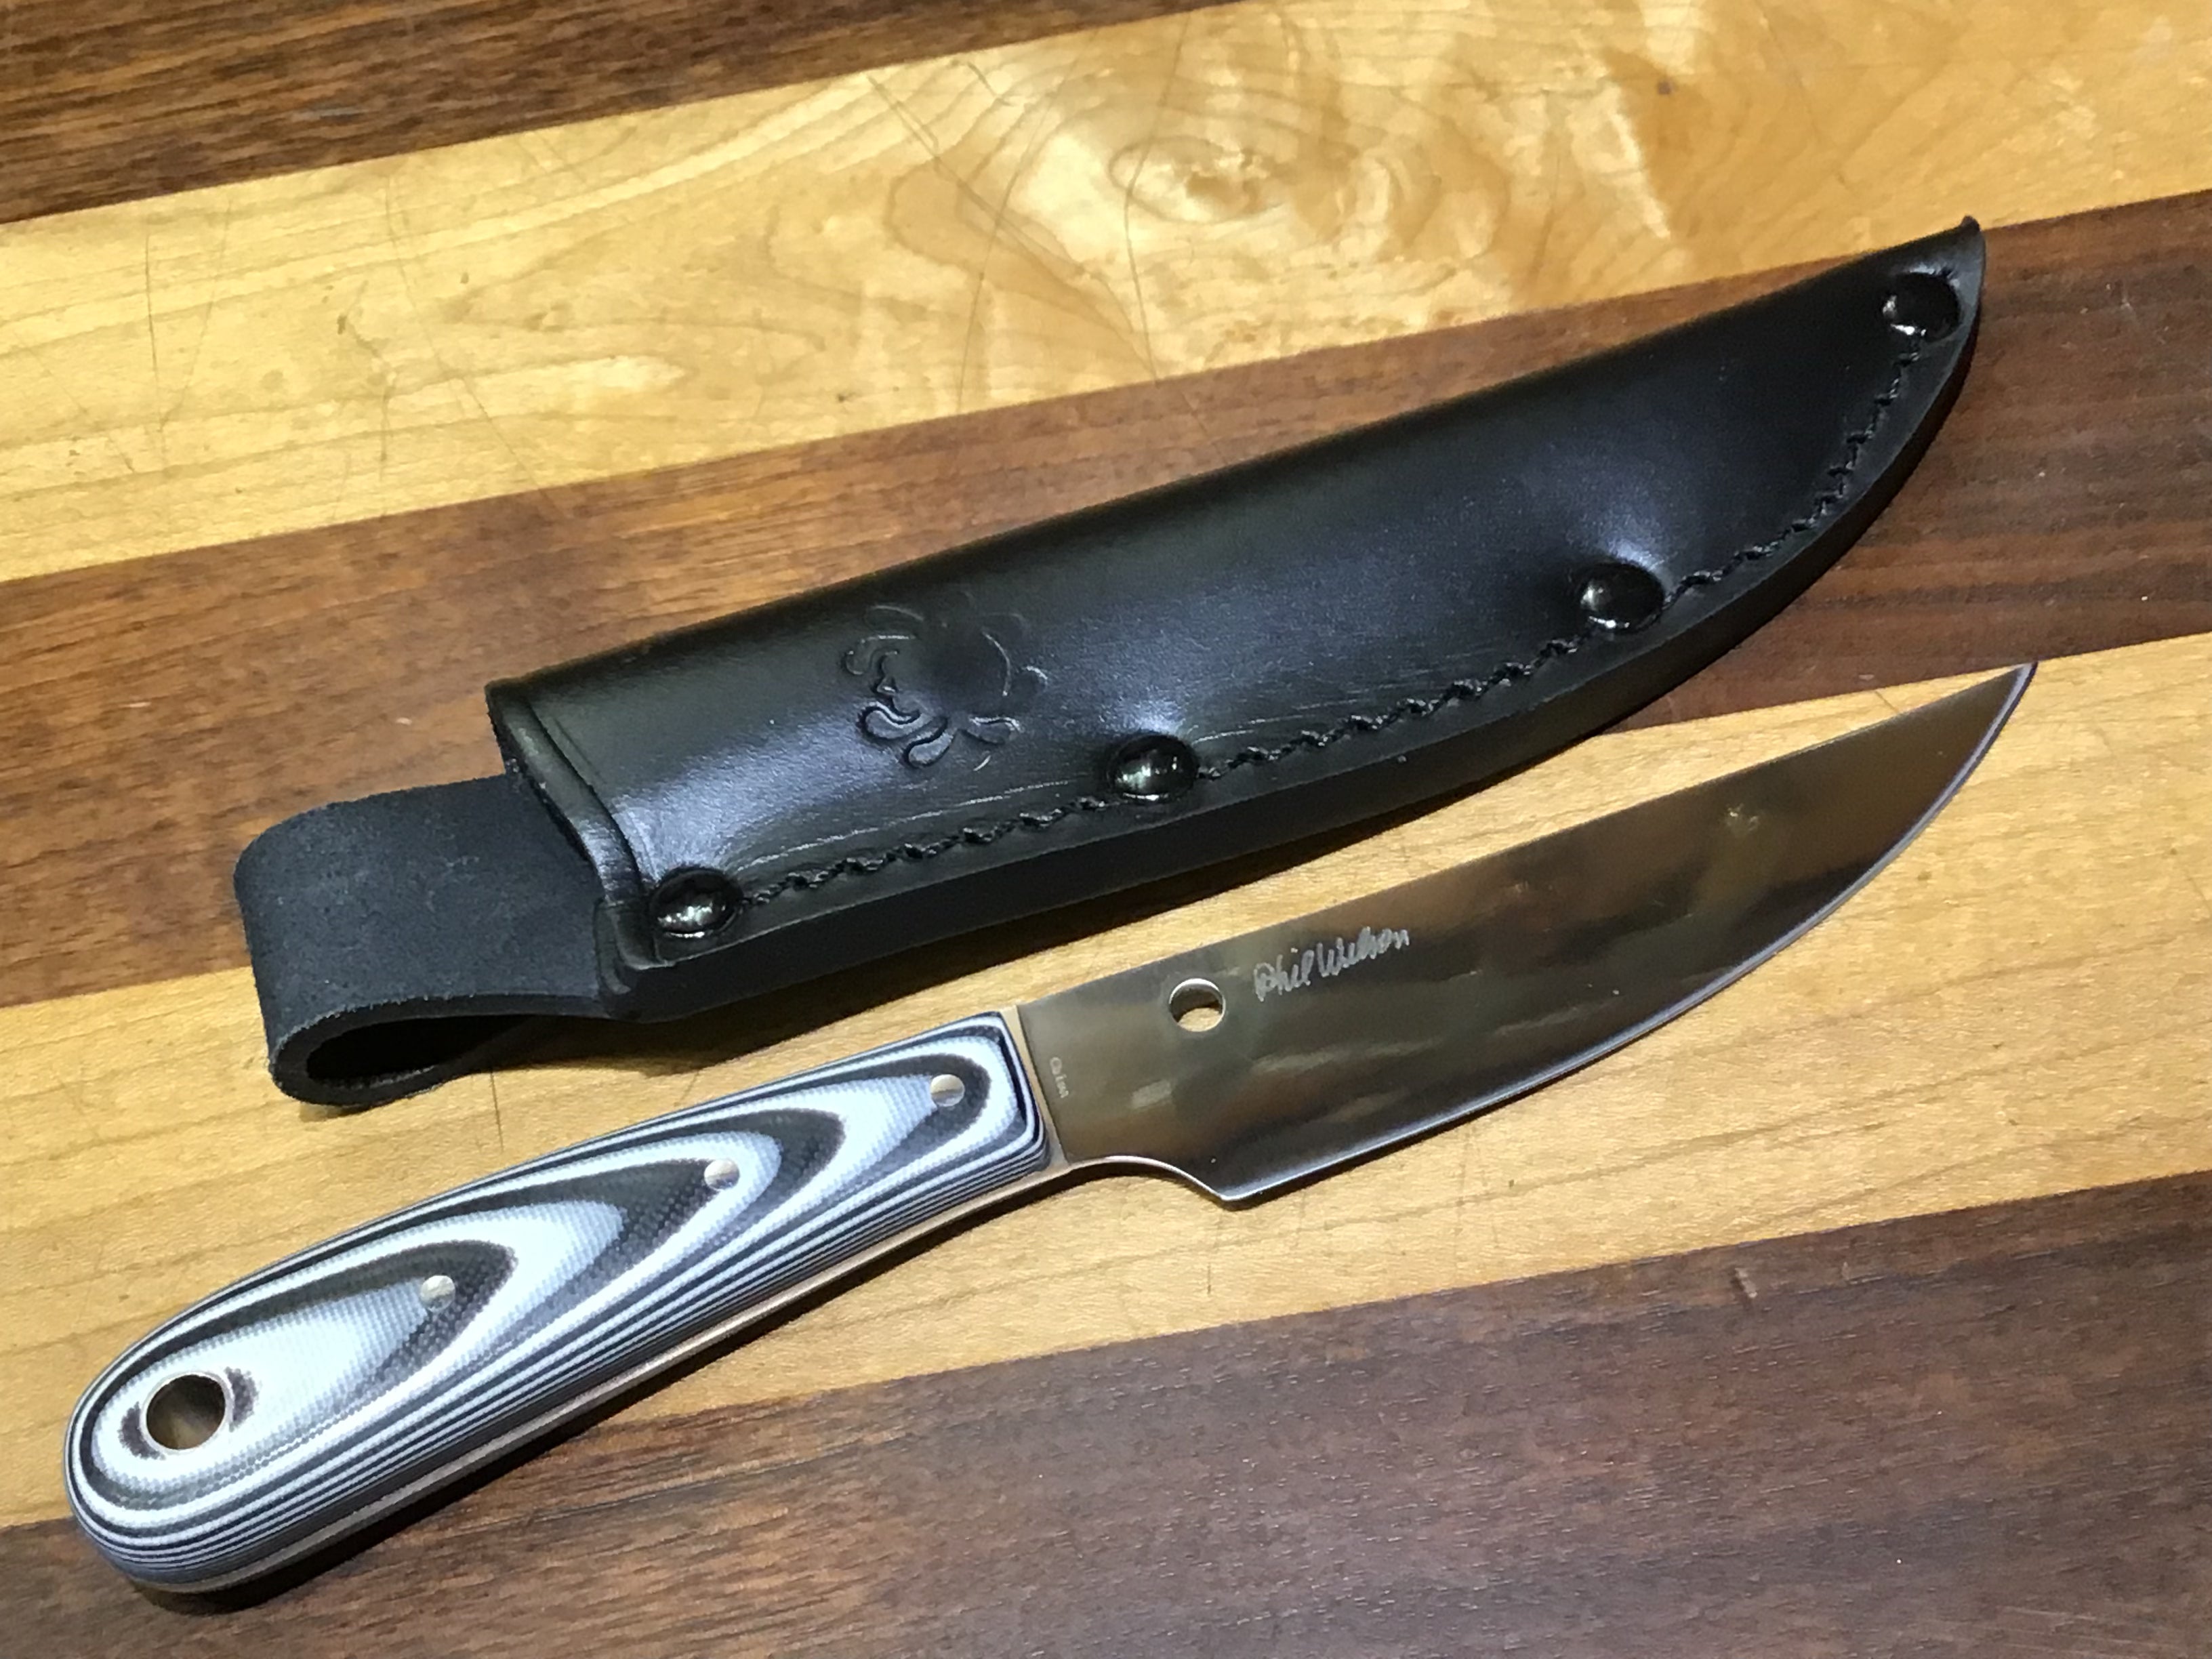 Spyderco Bow River Fixed Blade